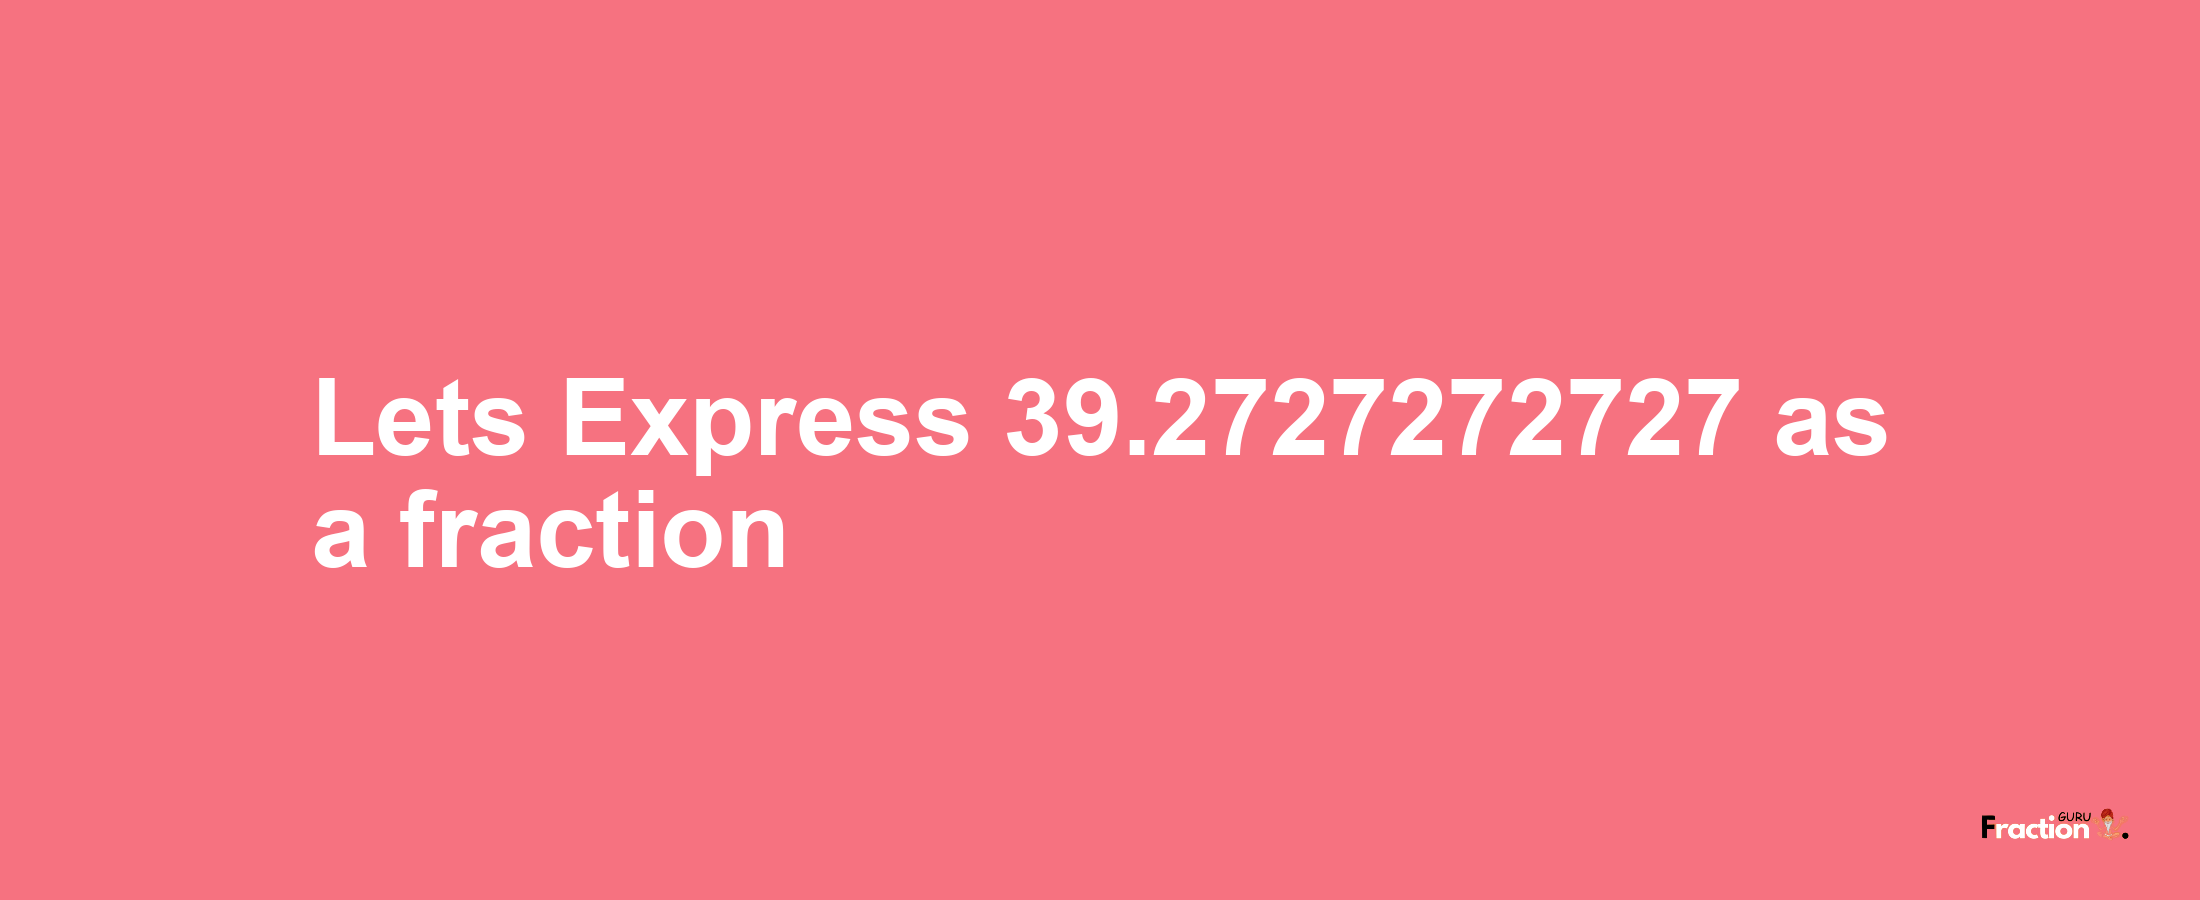 Lets Express 39.2727272727 as afraction